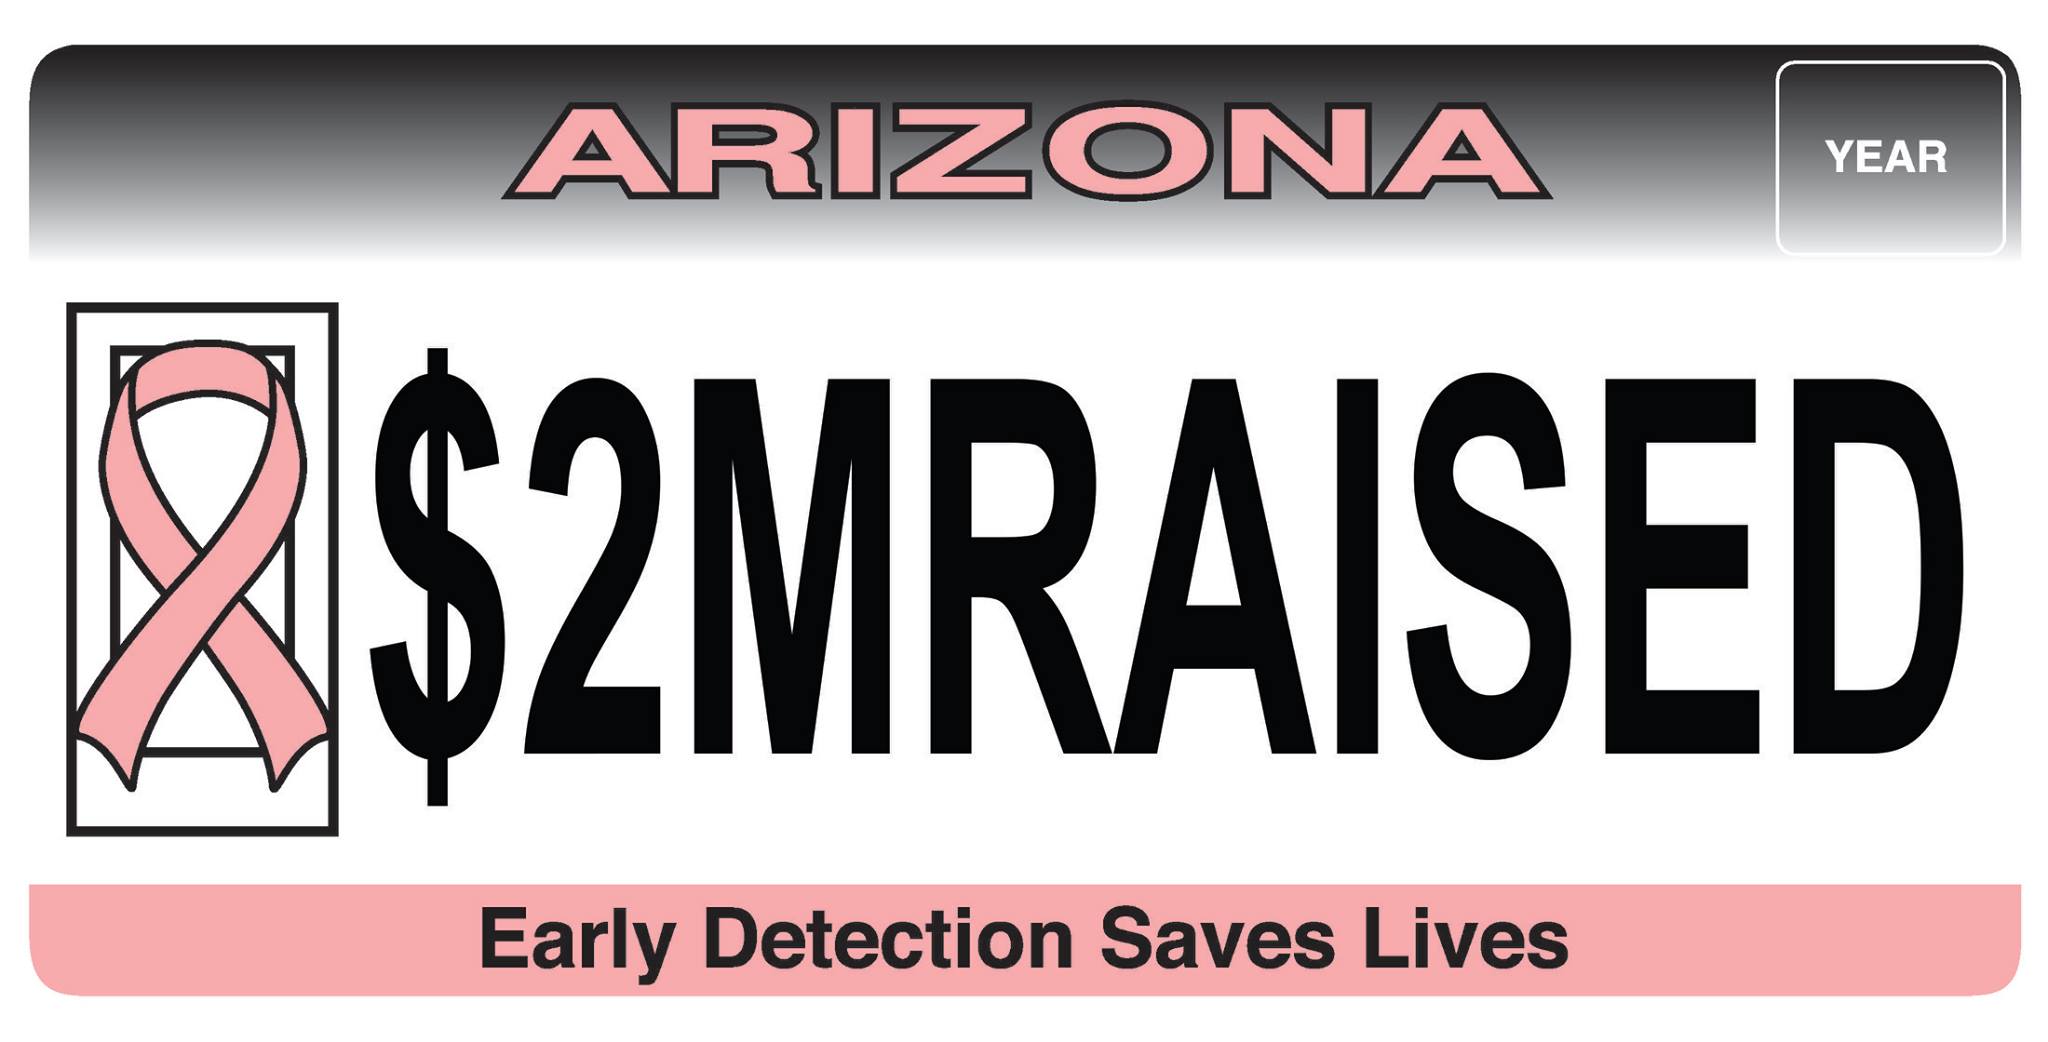 Breast cancer awareness specialty license plate.